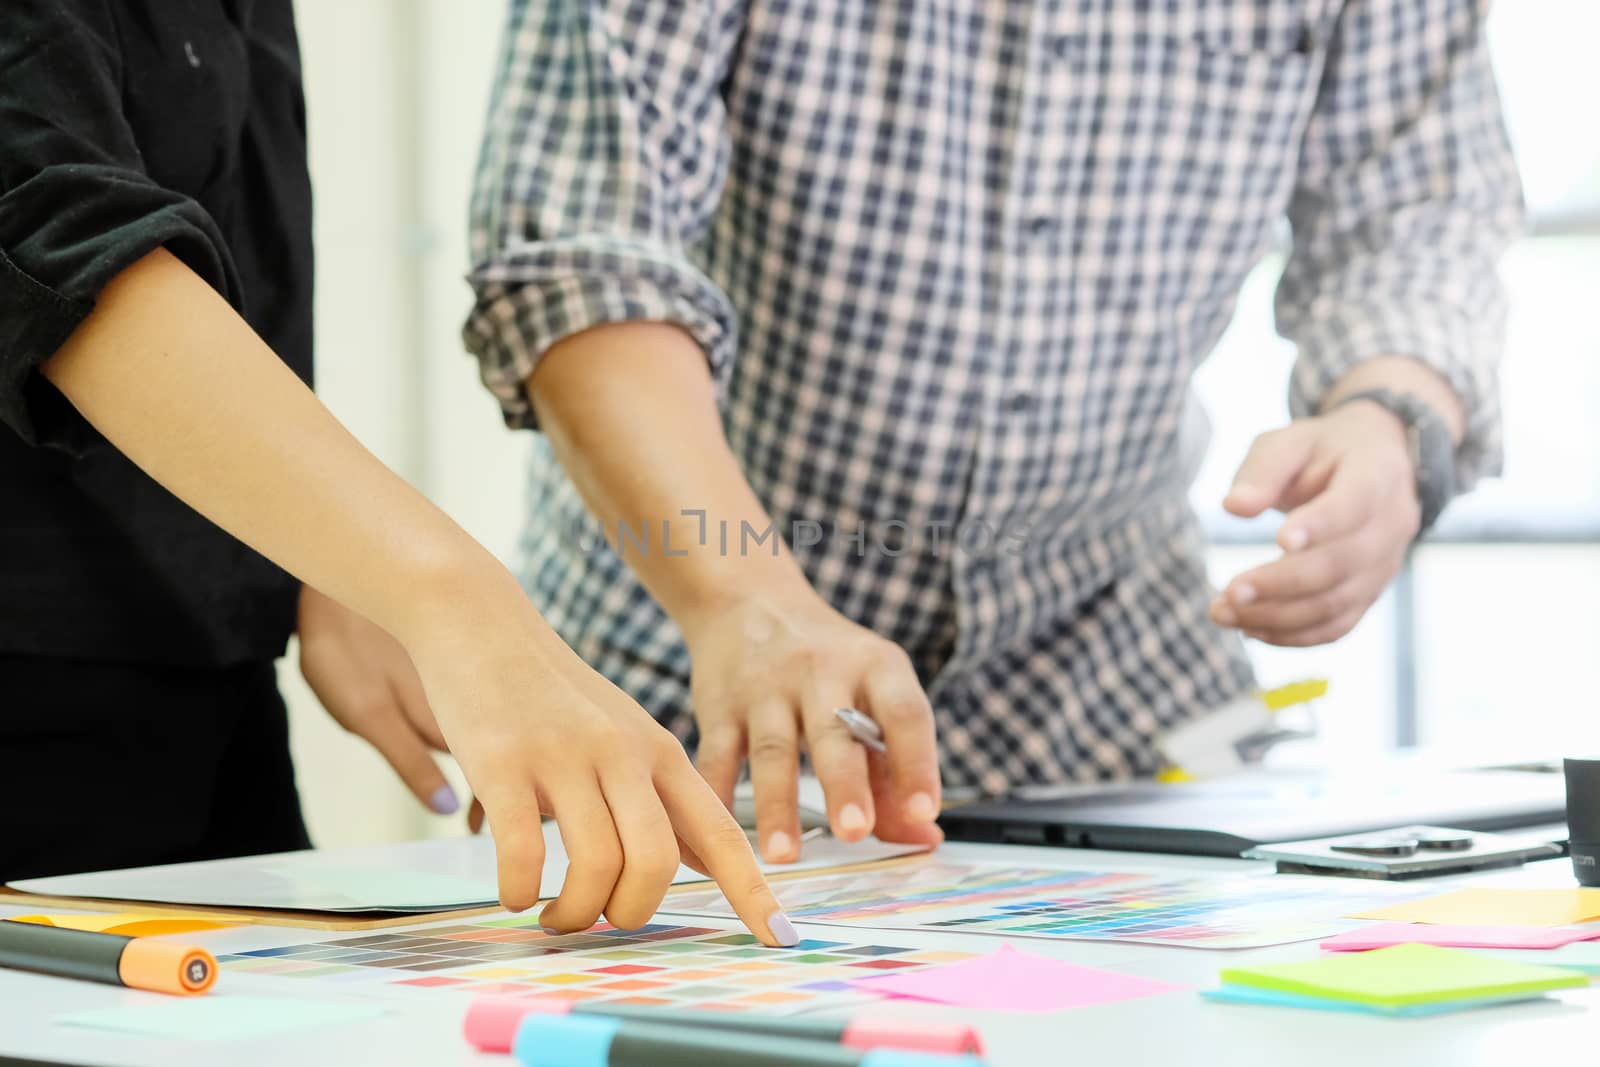 Graphic designer Team working on creative office with create graphic on computer.